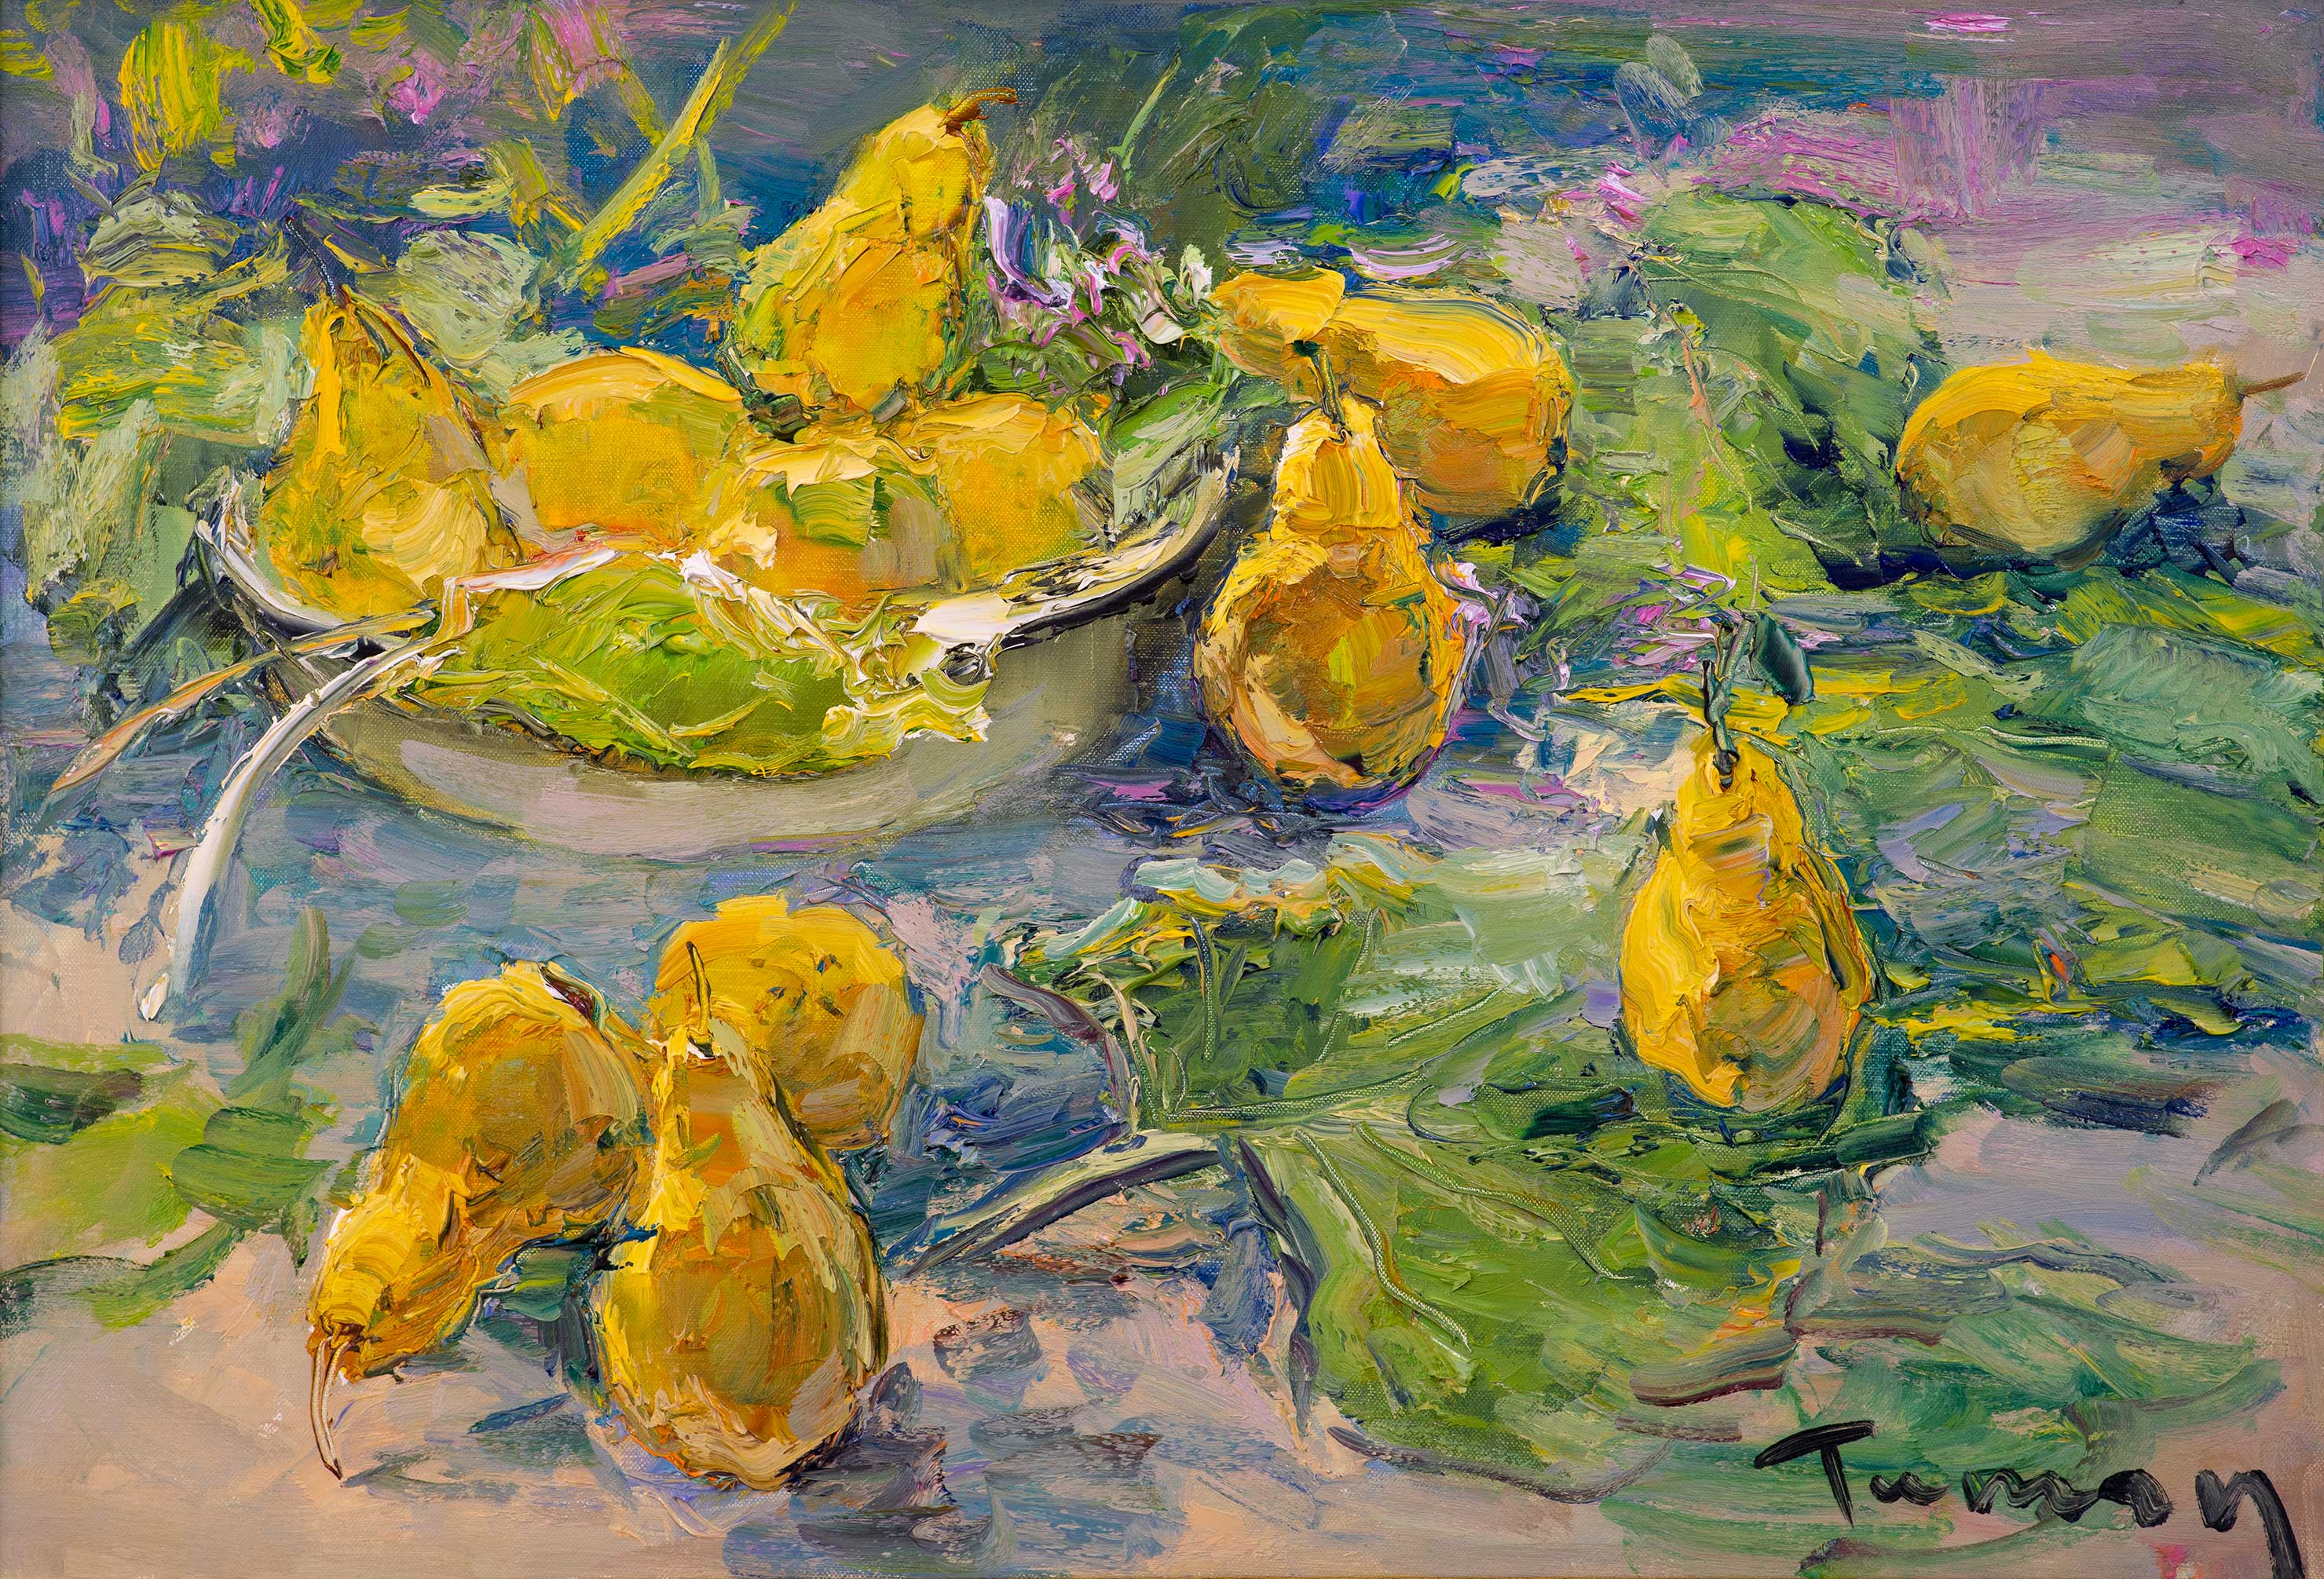 Pear - 1, Tuman Zhumabaev, Buy the painting Oil